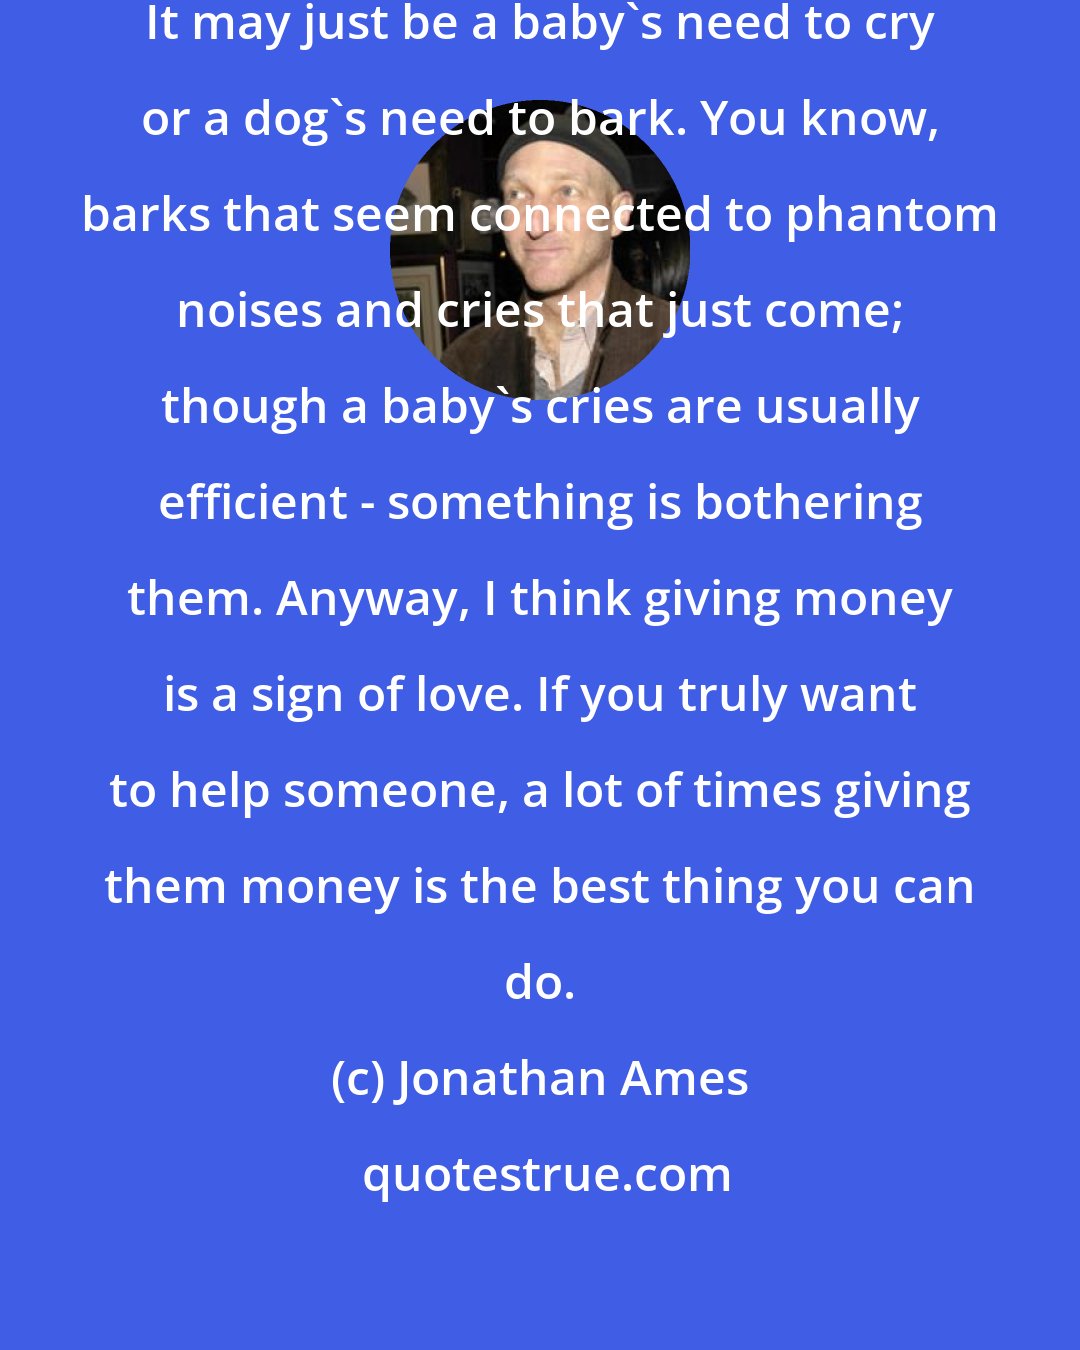 Jonathan Ames: Maybe my work isn't a cry for help. It may just be a baby's need to cry or a dog's need to bark. You know, barks that seem connected to phantom noises and cries that just come; though a baby's cries are usually efficient - something is bothering them. Anyway, I think giving money is a sign of love. If you truly want to help someone, a lot of times giving them money is the best thing you can do.